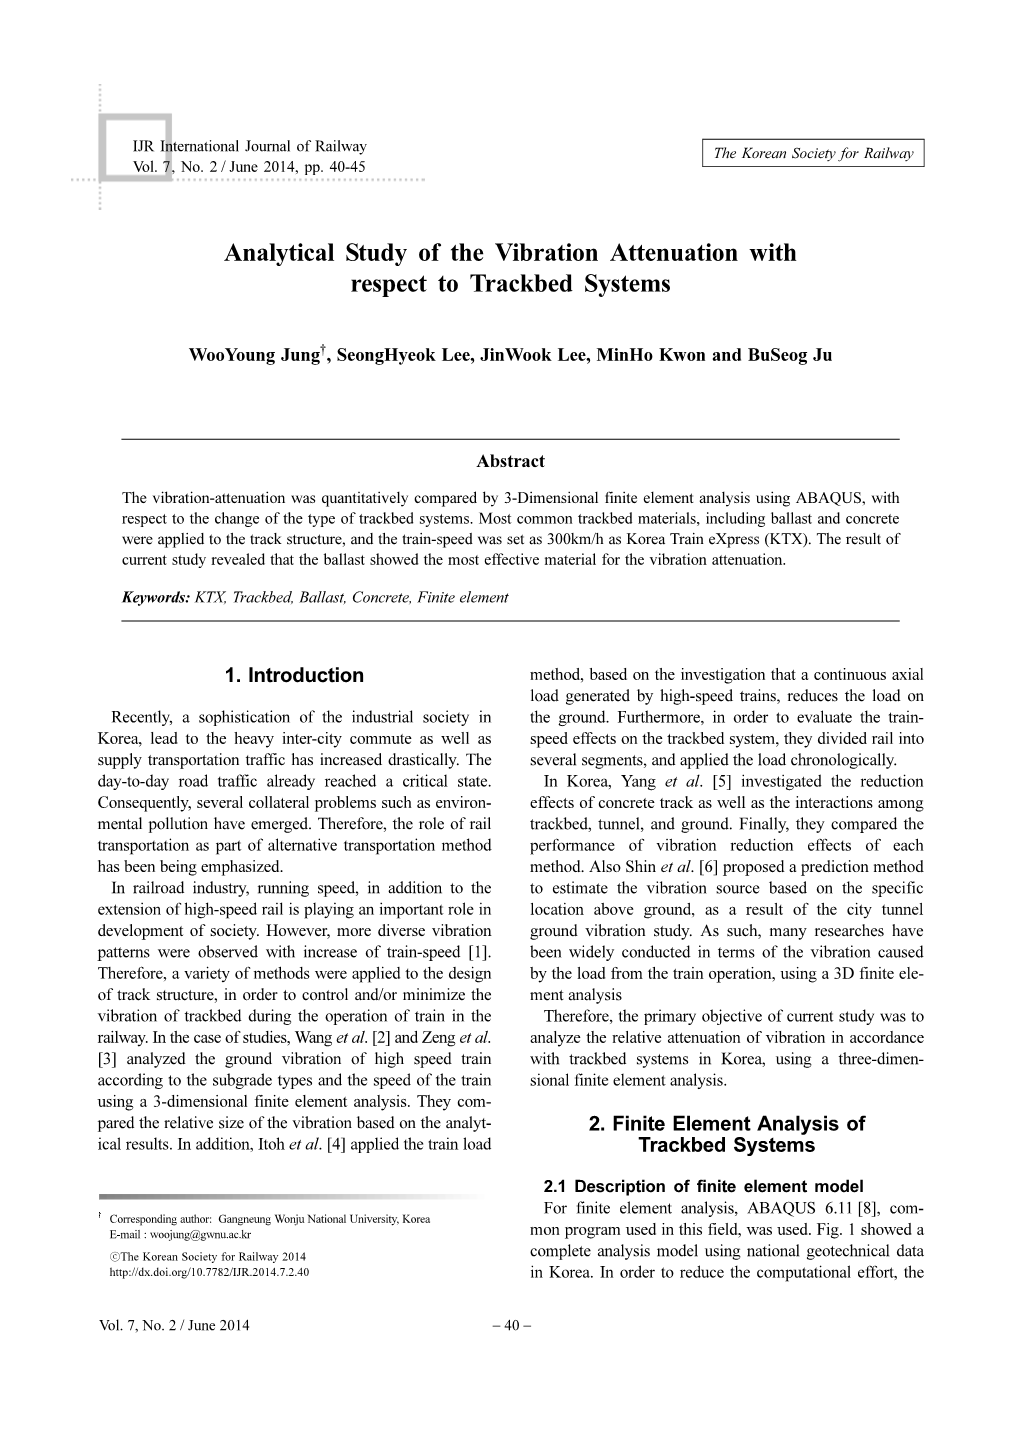 Analytical Study of the Vibration Attenuation with Respect to Trackbed Systems